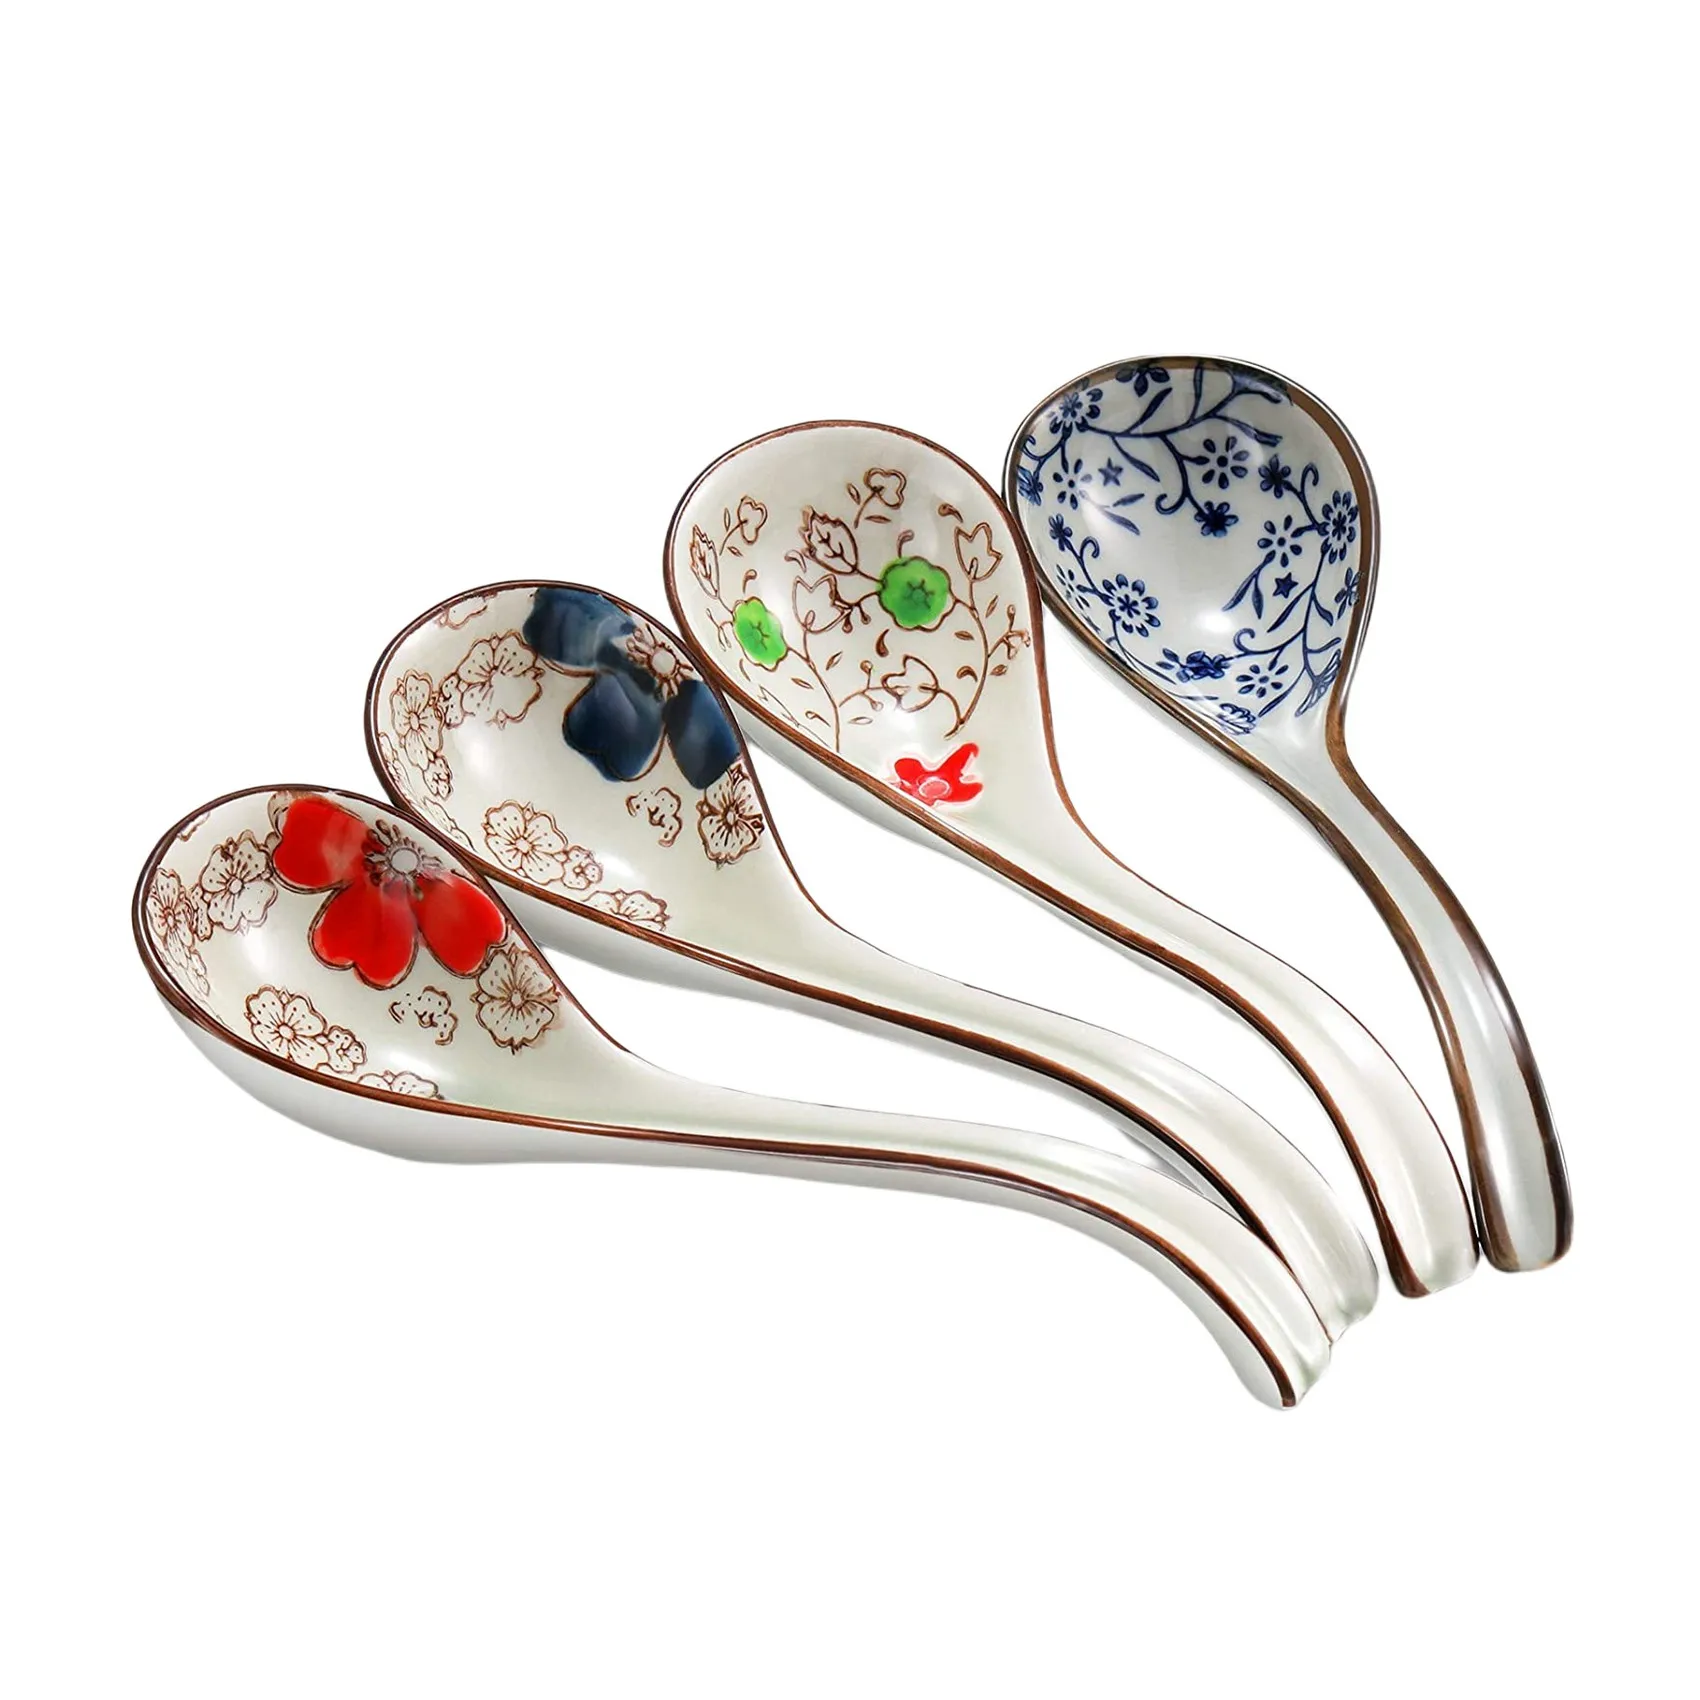 4 Pieces Asian Retro Chinese Ceramic Rice Spoons Curved Handle Ramen Soup Spoon Painted Flower Spoons with Long Handle